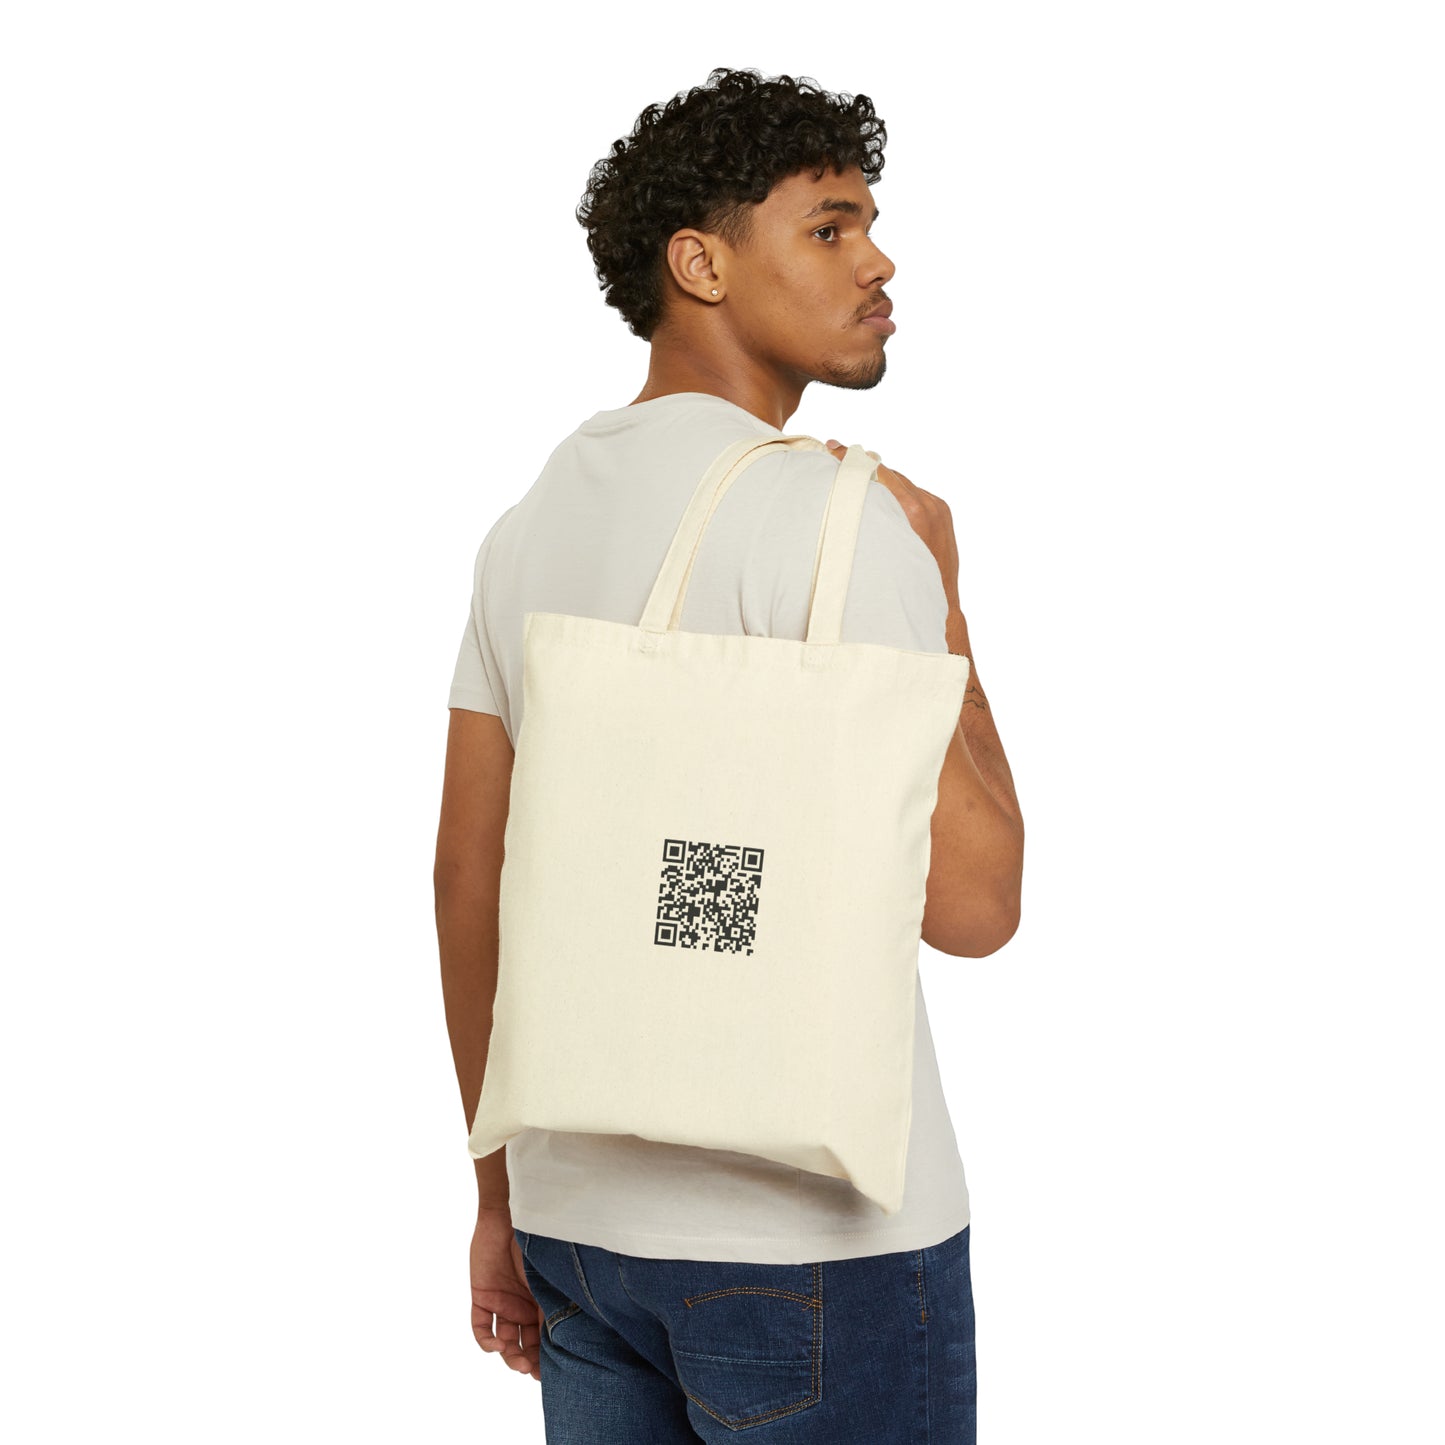 The Branded Ones - Cotton Canvas Tote Bag